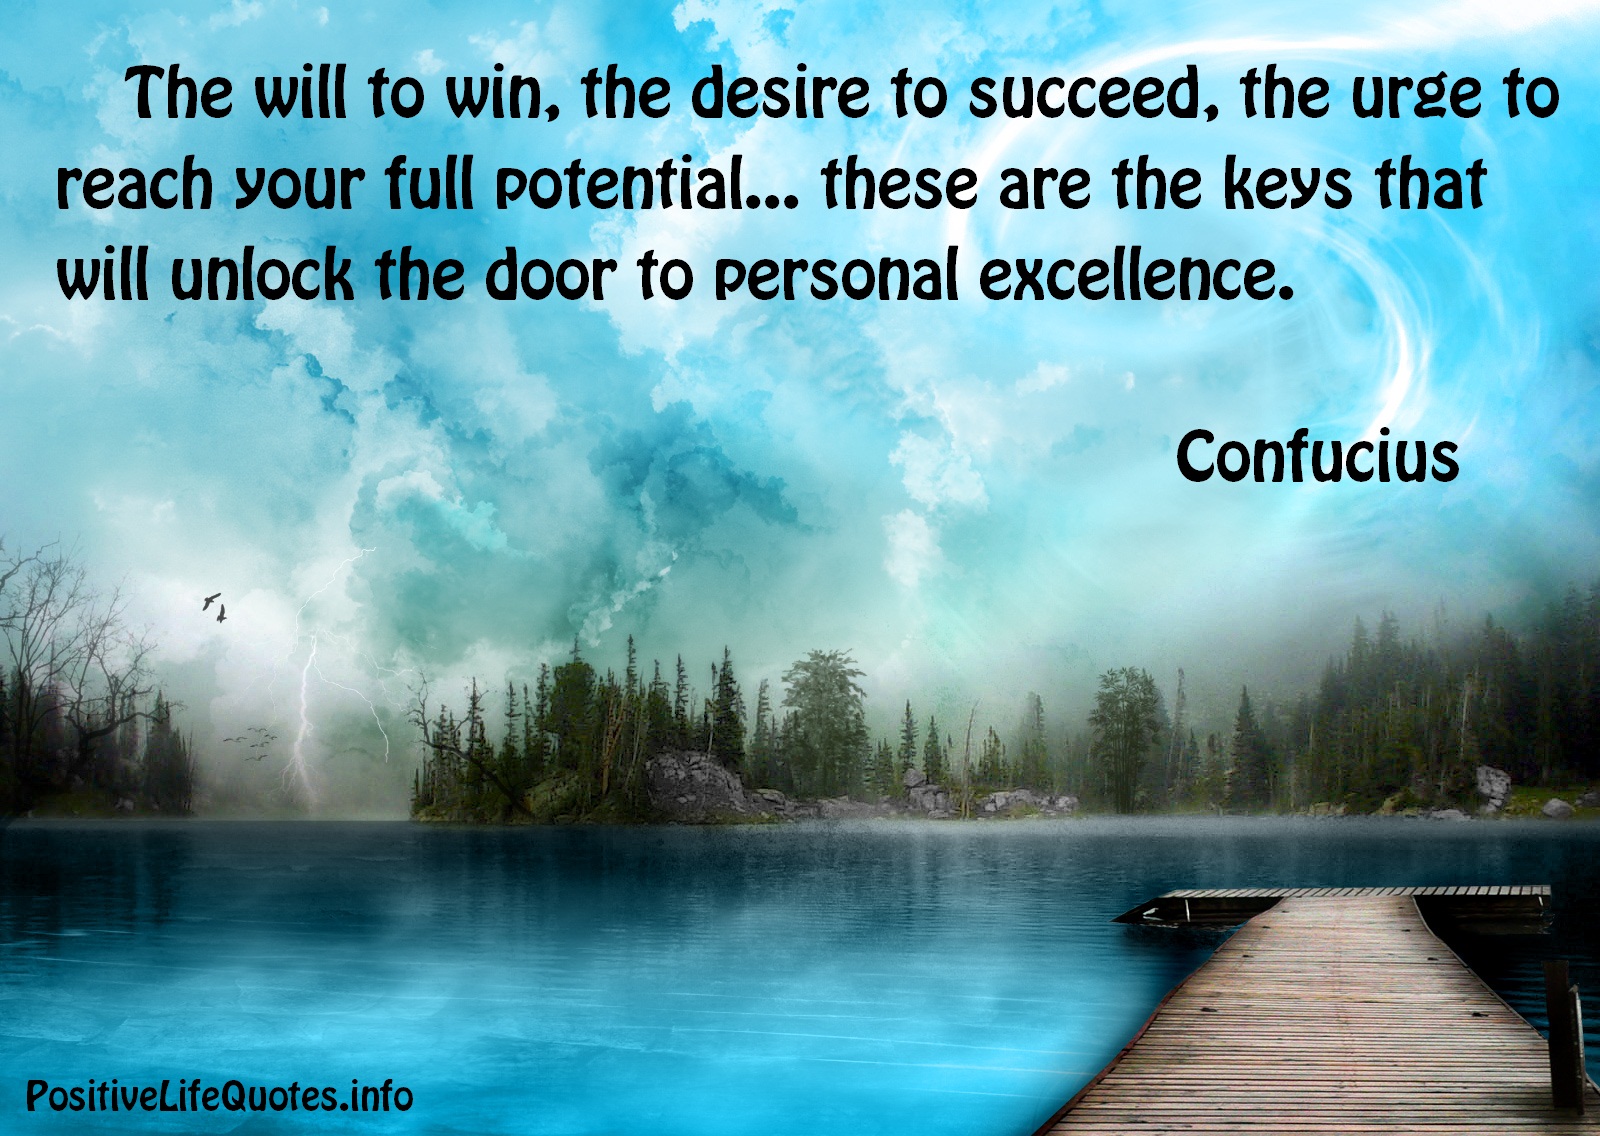 The will to win, the desire to succeed, the urge to reach your full potential... these are the keys that will unlock the door to personal excellence. Confucius